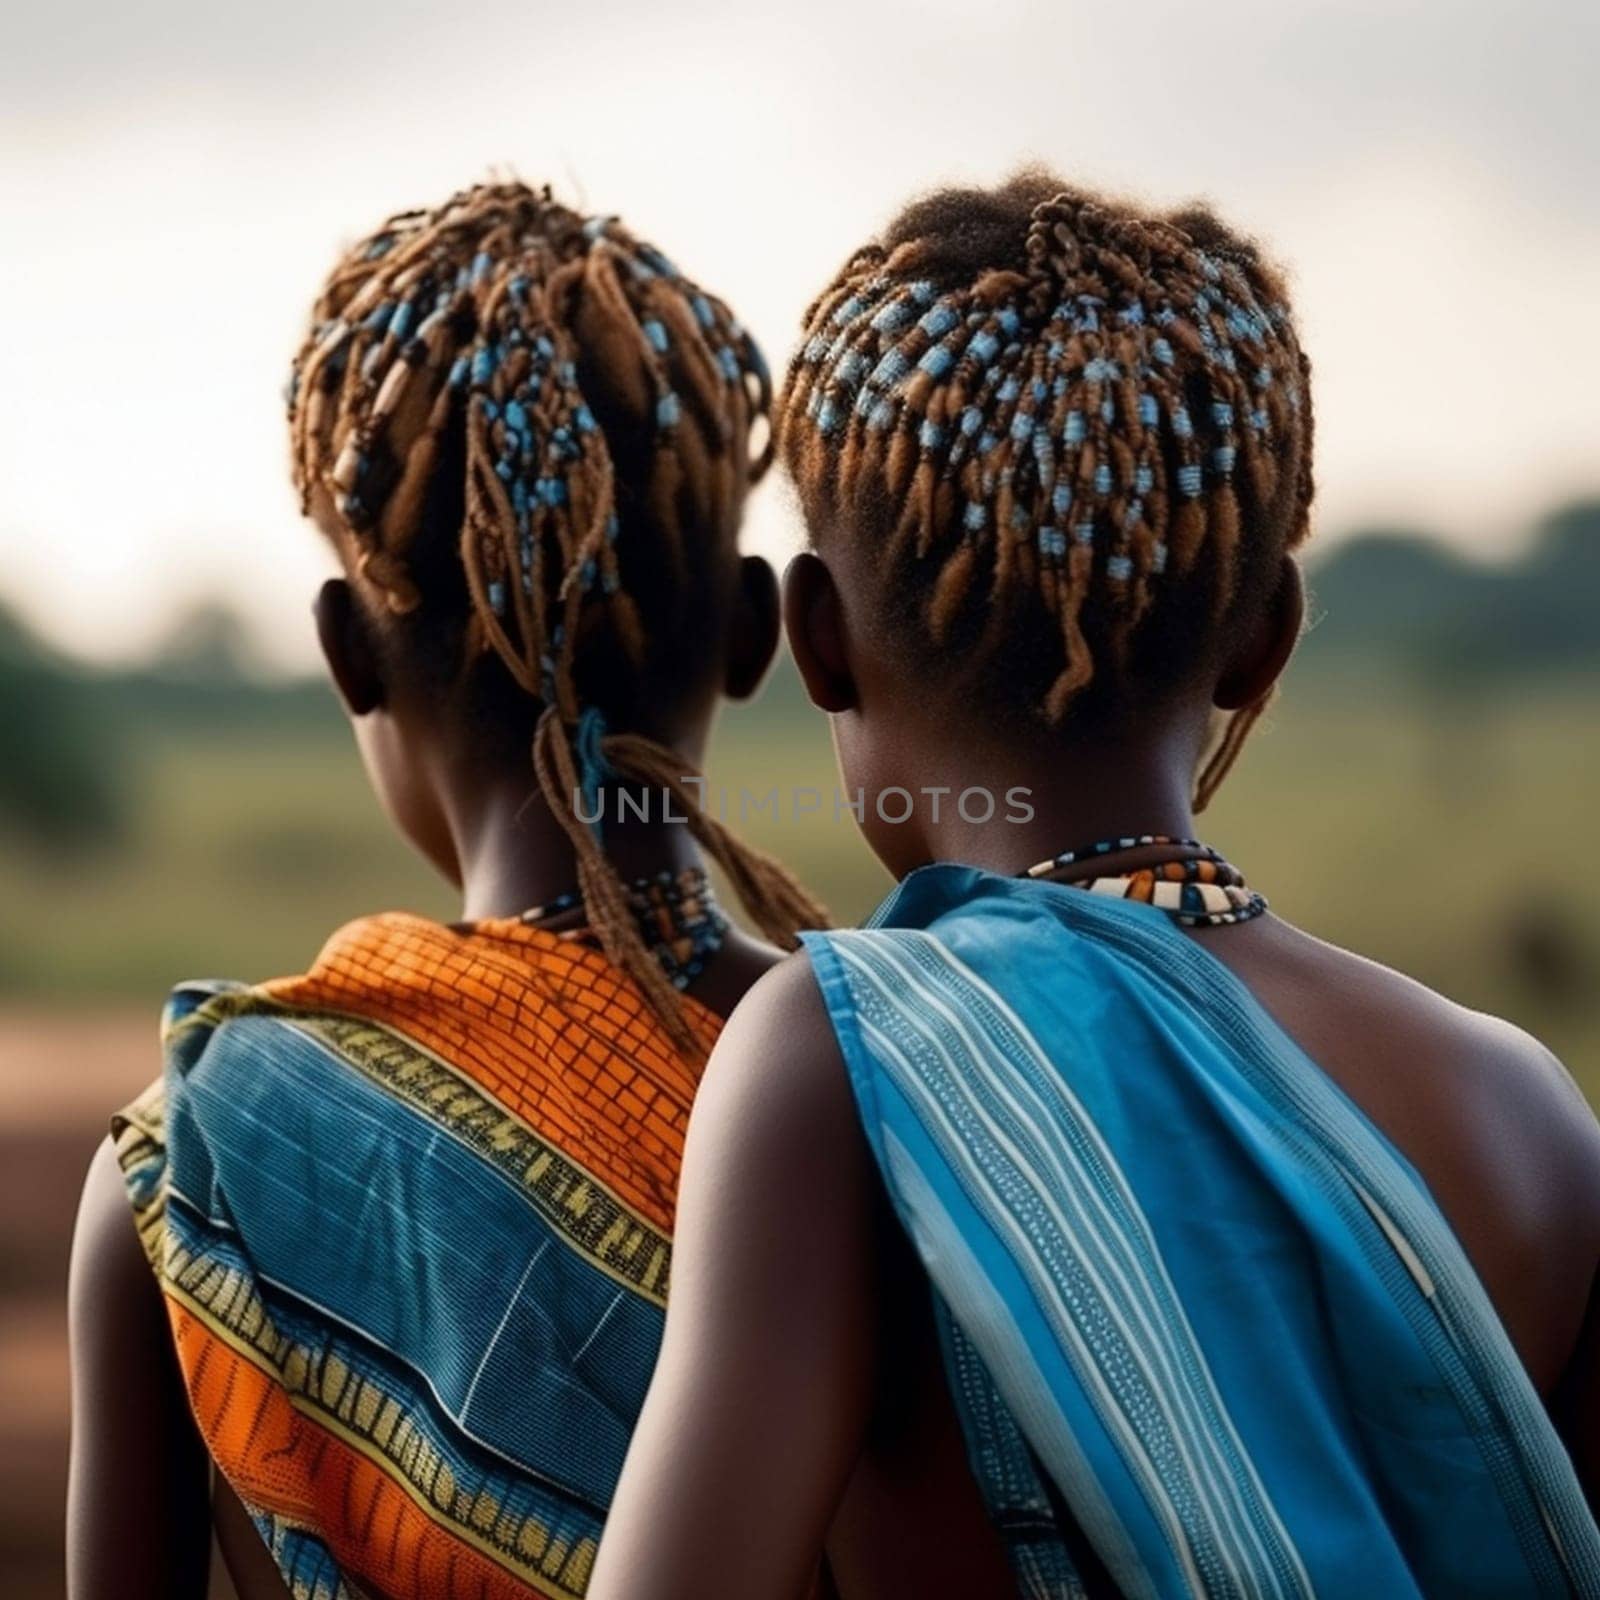 two African girls in national clothes view from the back against the backdrop of nature in the background by Costin